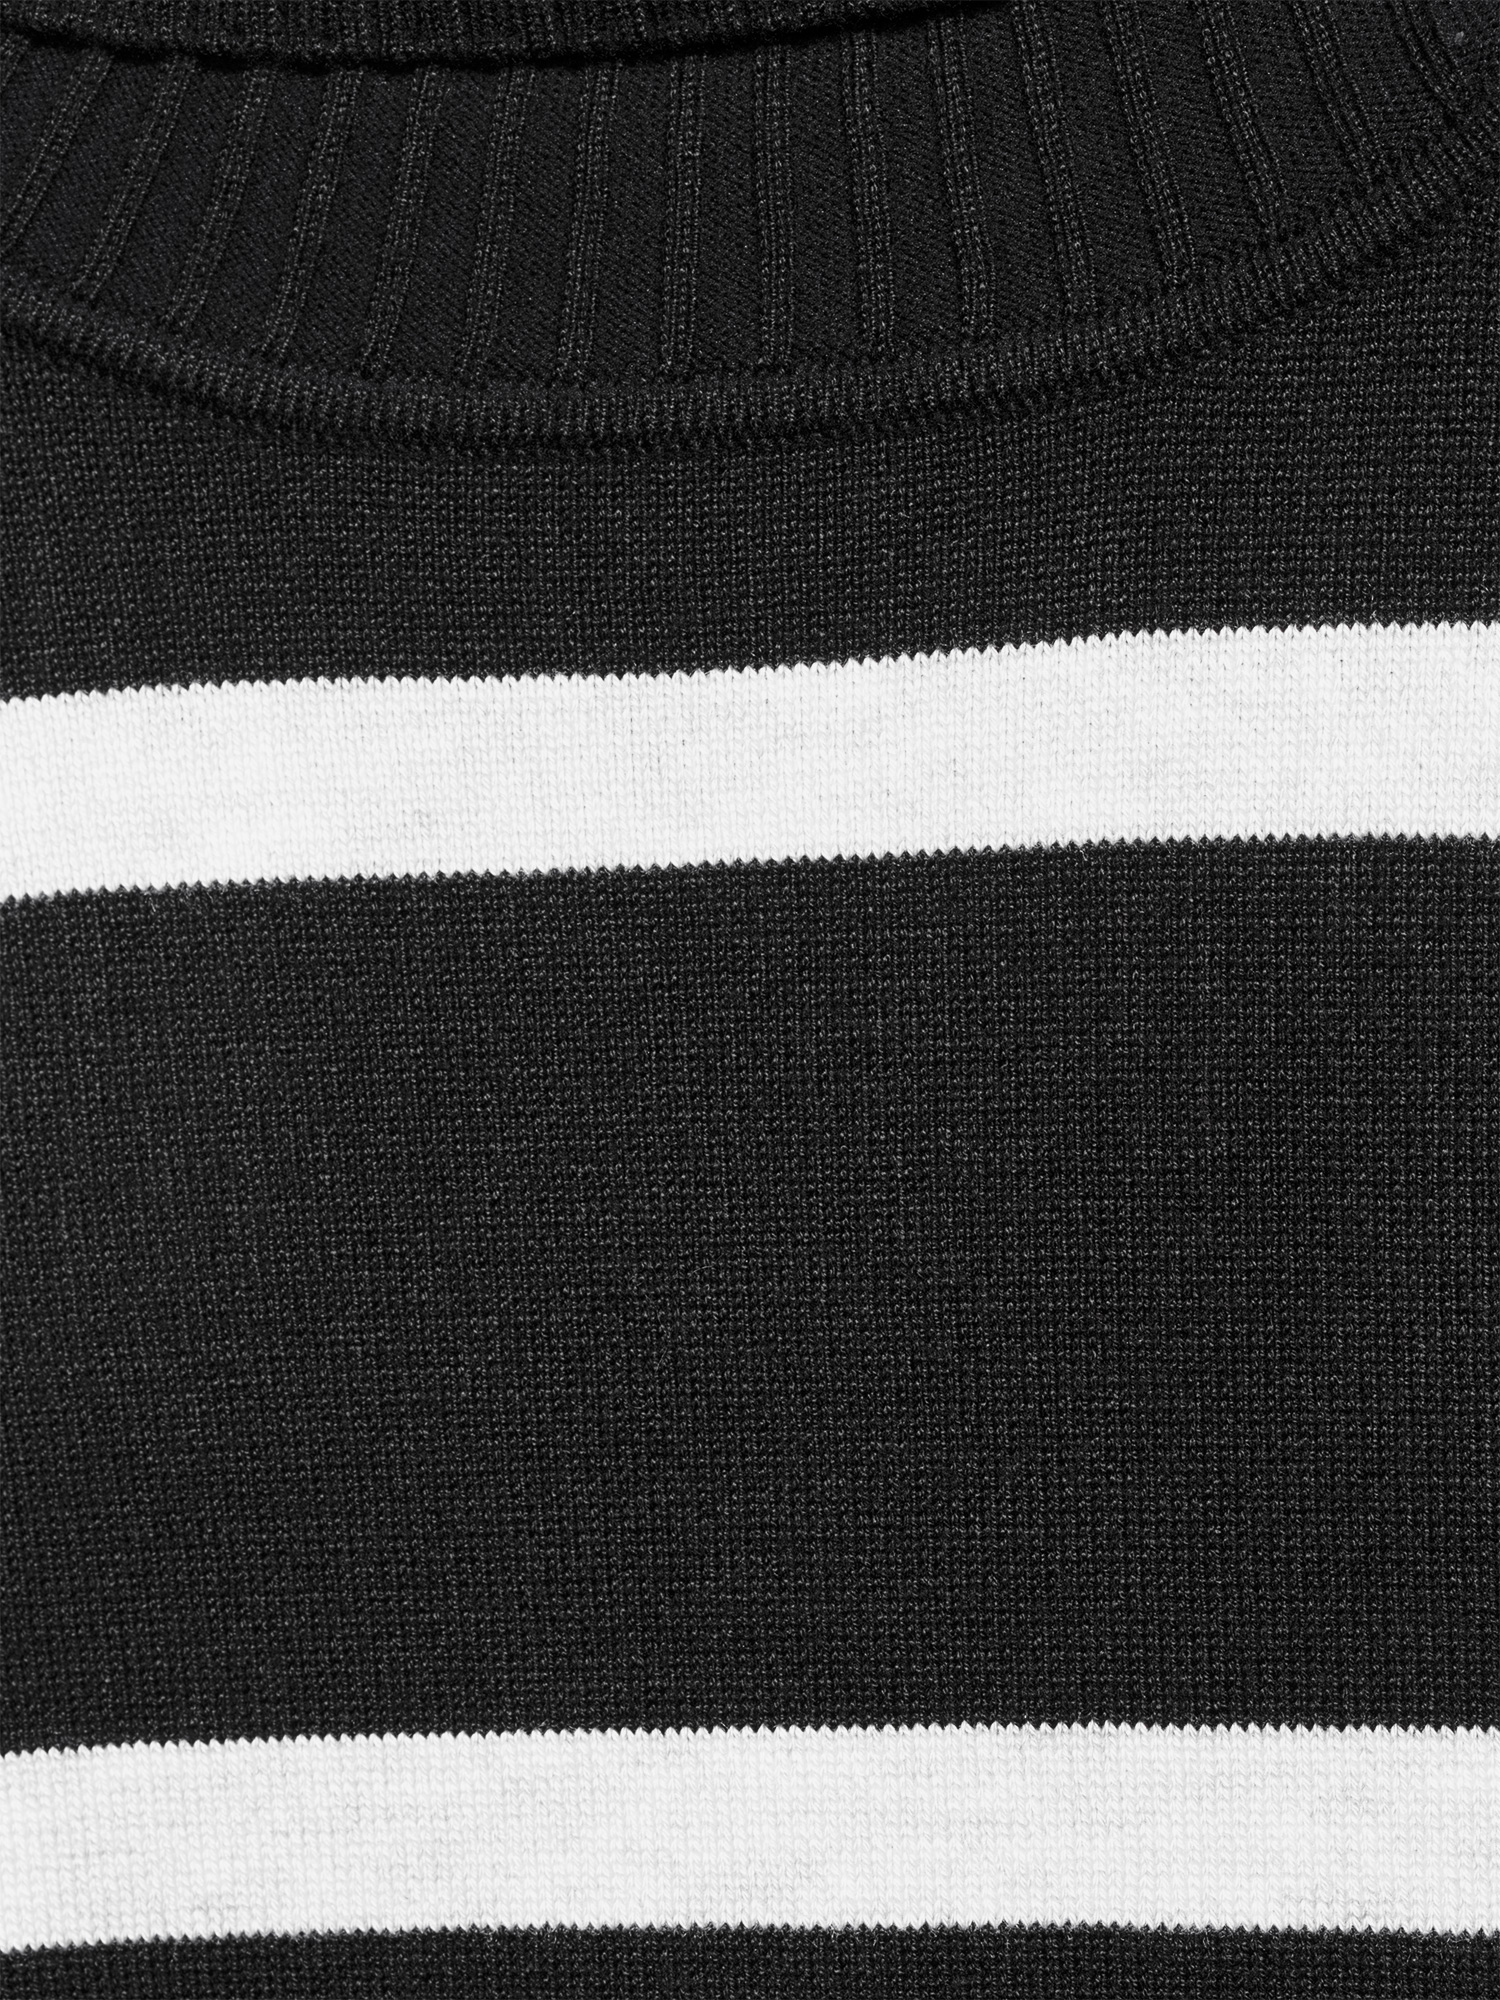 Time and Tru Women's Striped Turtleneck Sweater - image 3 of 6